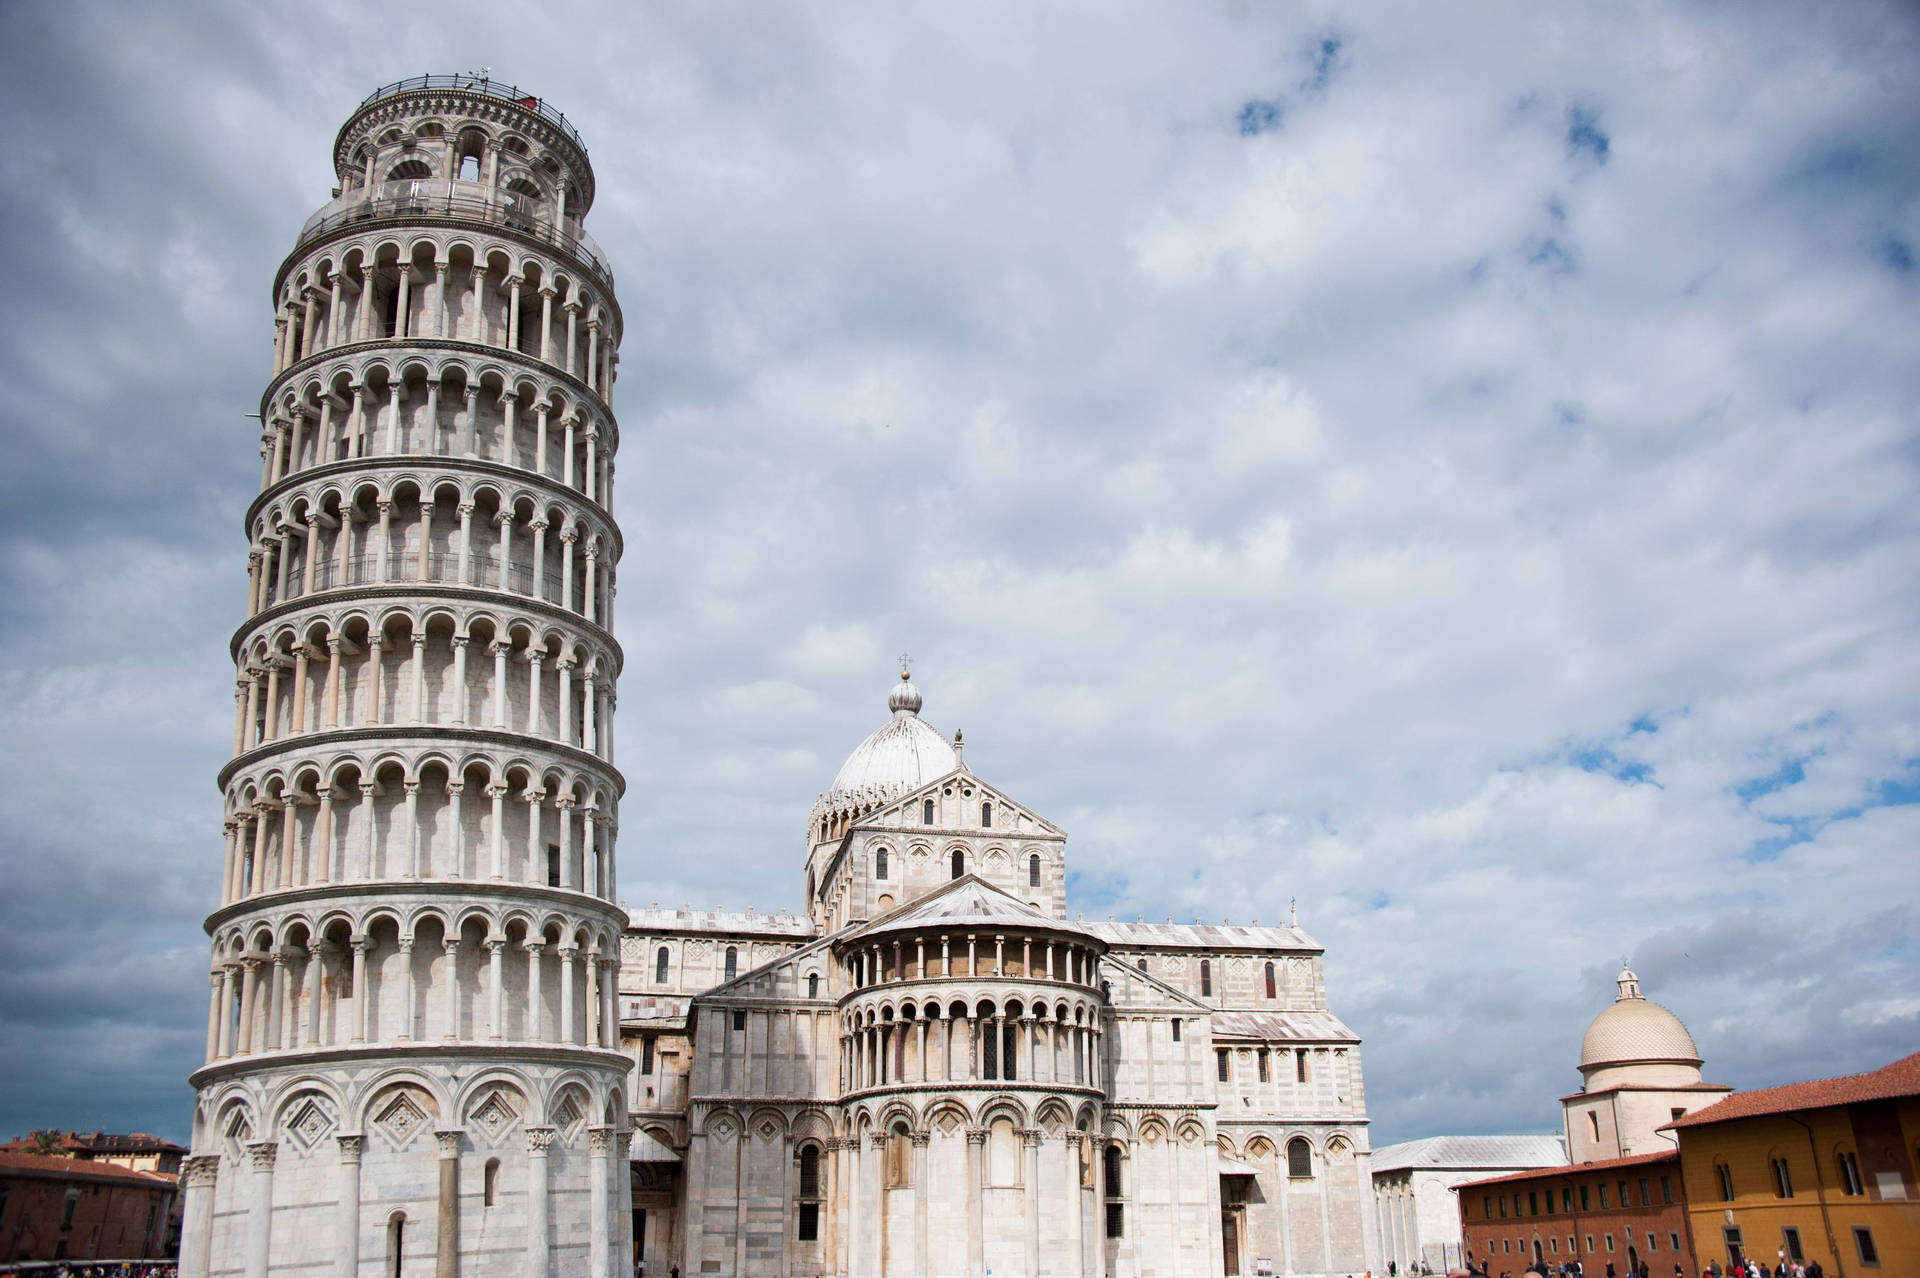 Leaning Tower Of Pisa Front View Wallpaper